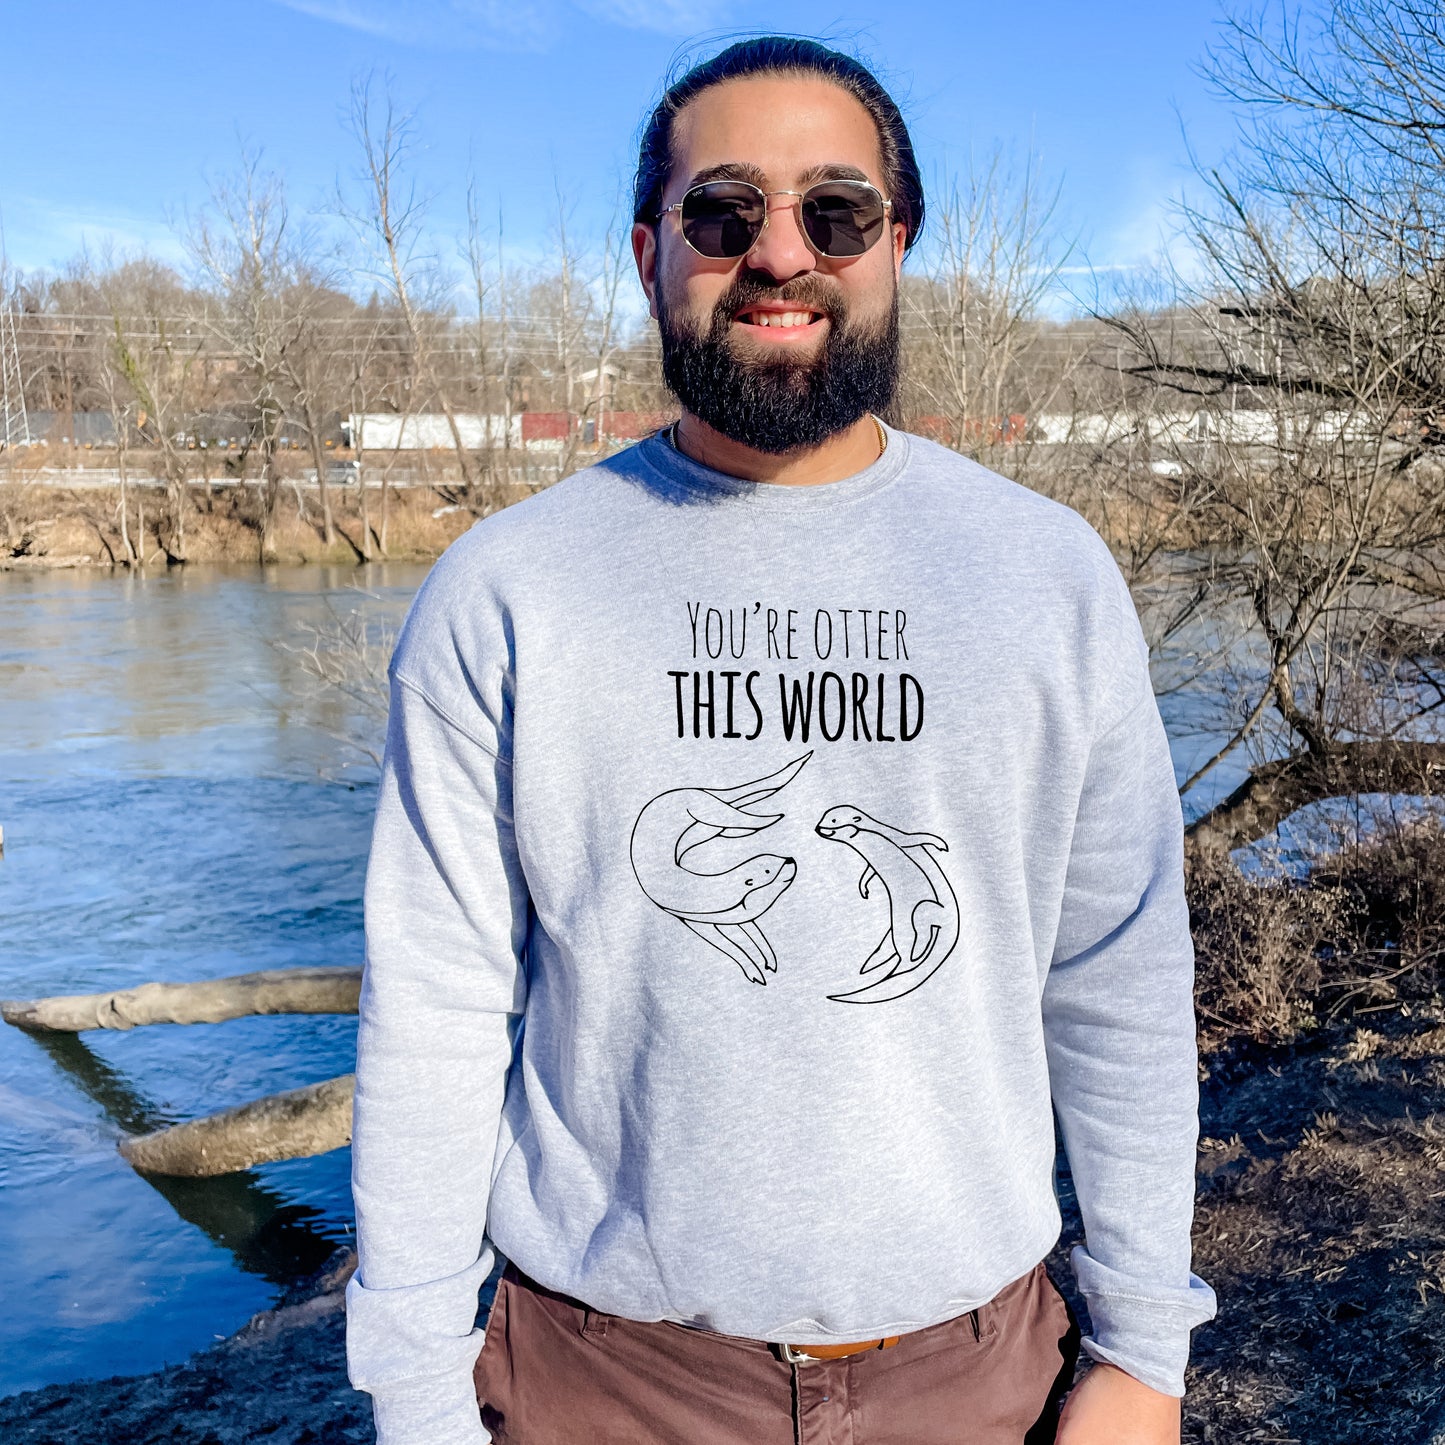 You're Otter This World - Unisex Sweatshirt - Heather Gray or Dusty Blue